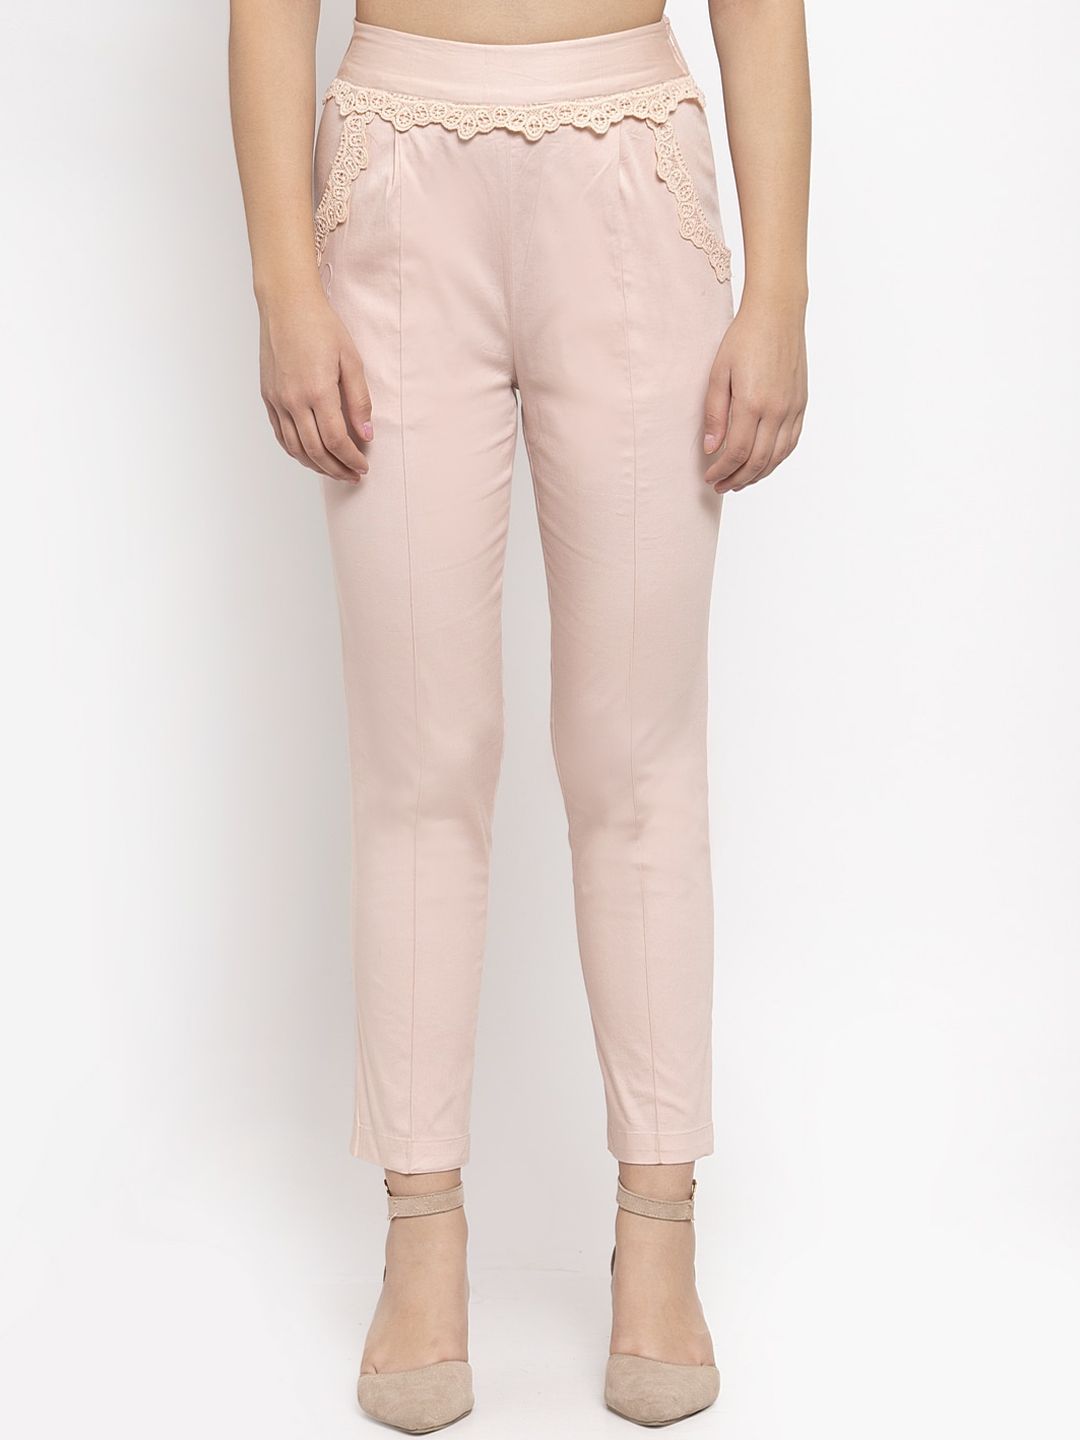 KASSUALLY Women Peach-Coloured Solid Regular Trousers Price in India